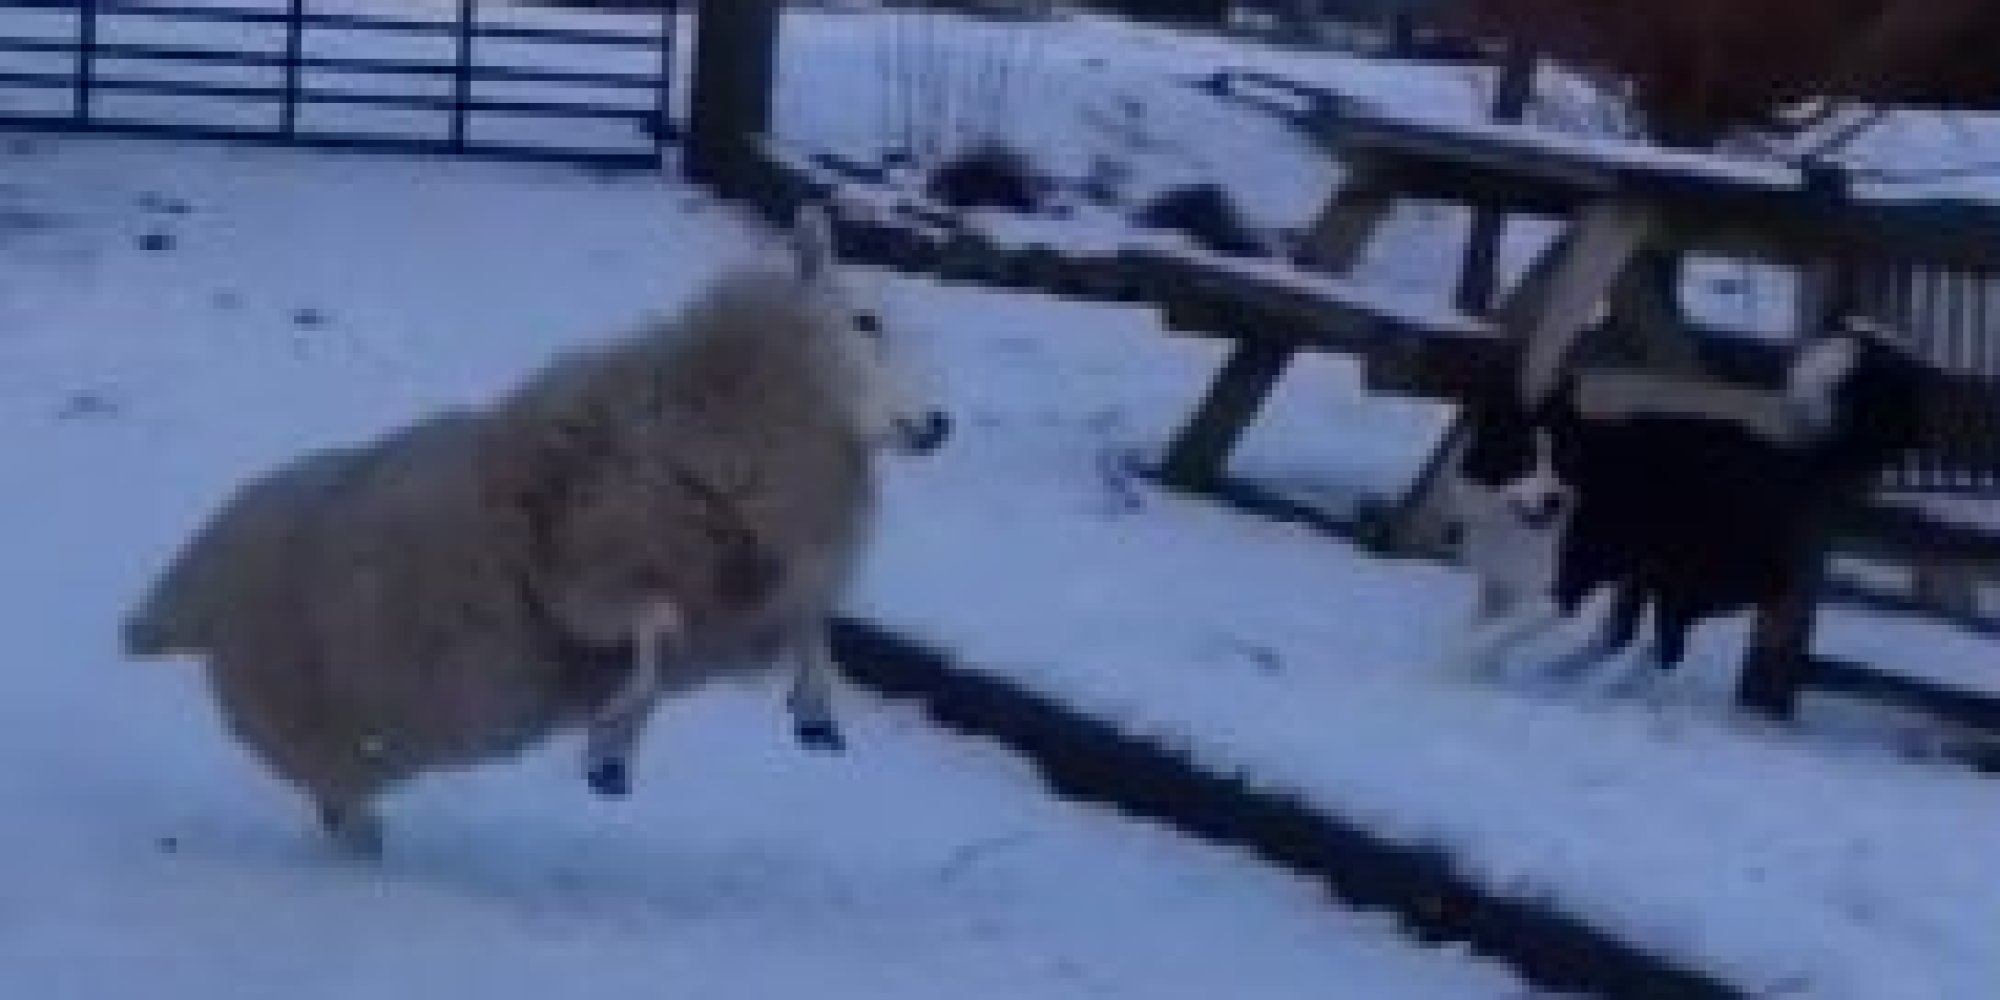 Sheep Forgets How To Sheep, Frolics With Dogs Instead2000 x 1000